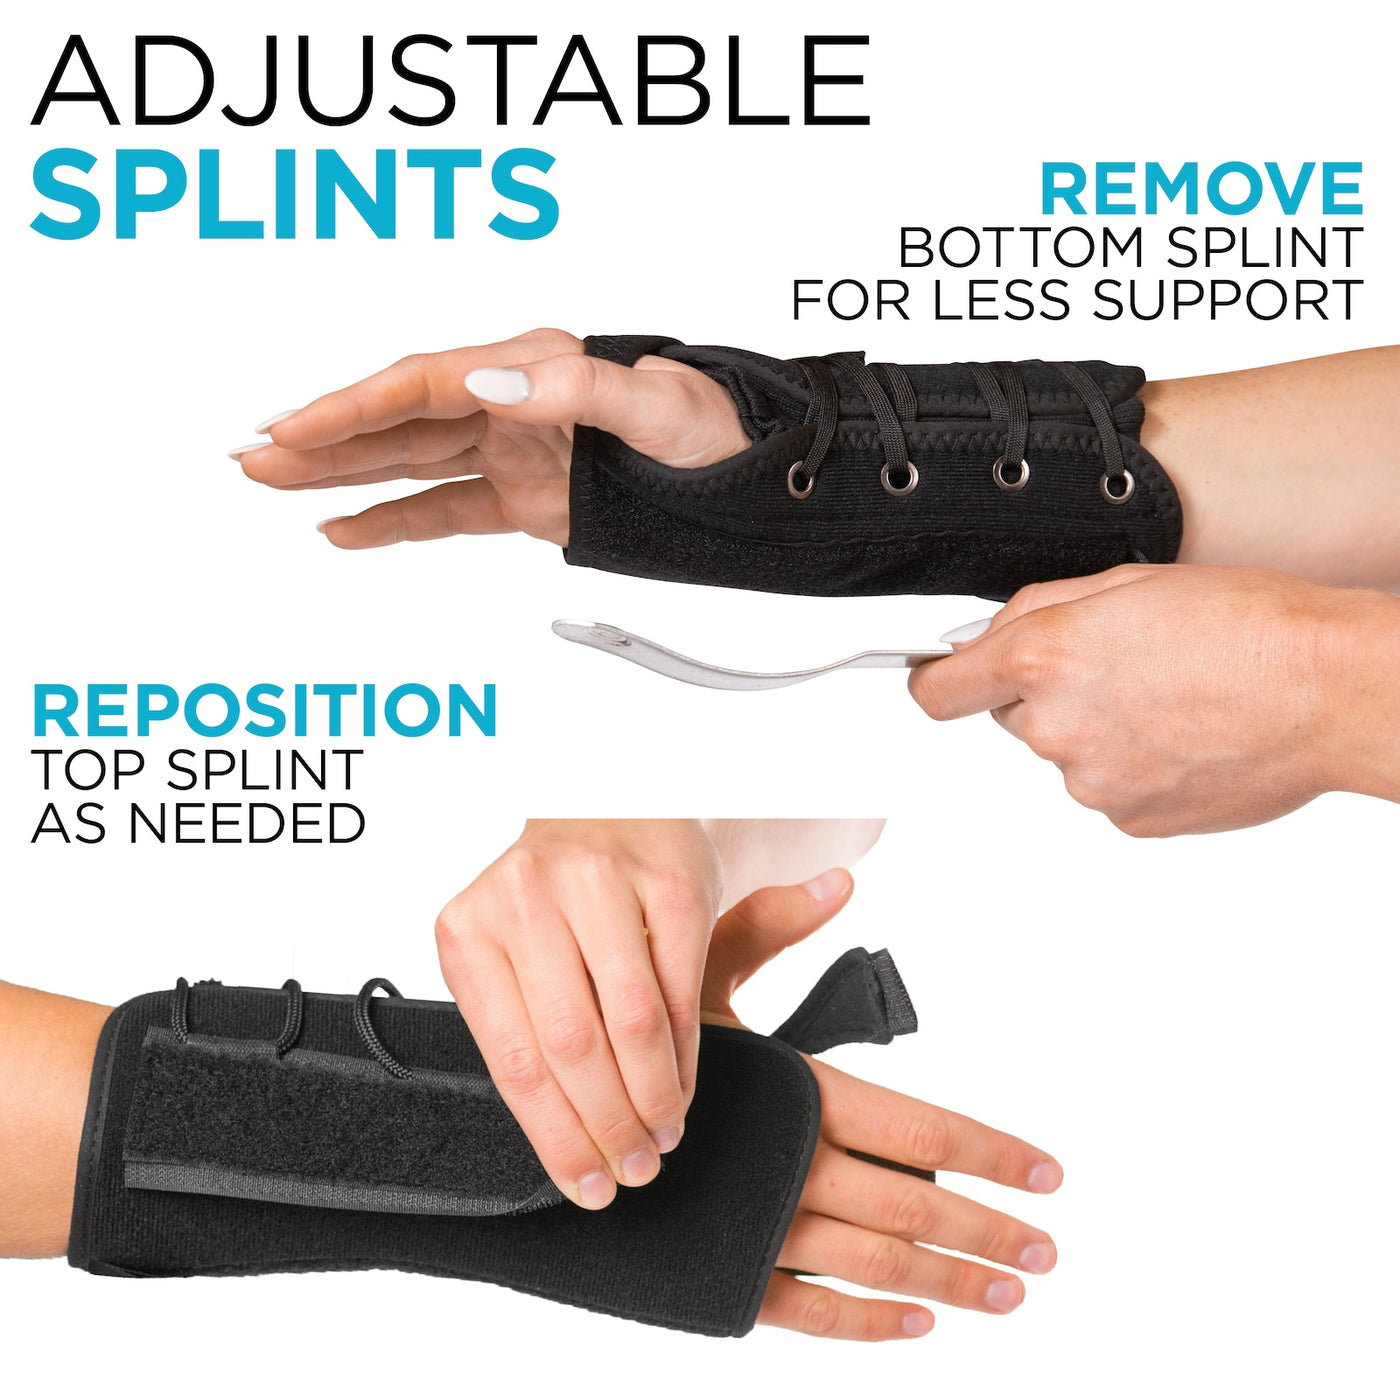 Wrist 3-Strap Support for Faster Wrist Injury Recovery